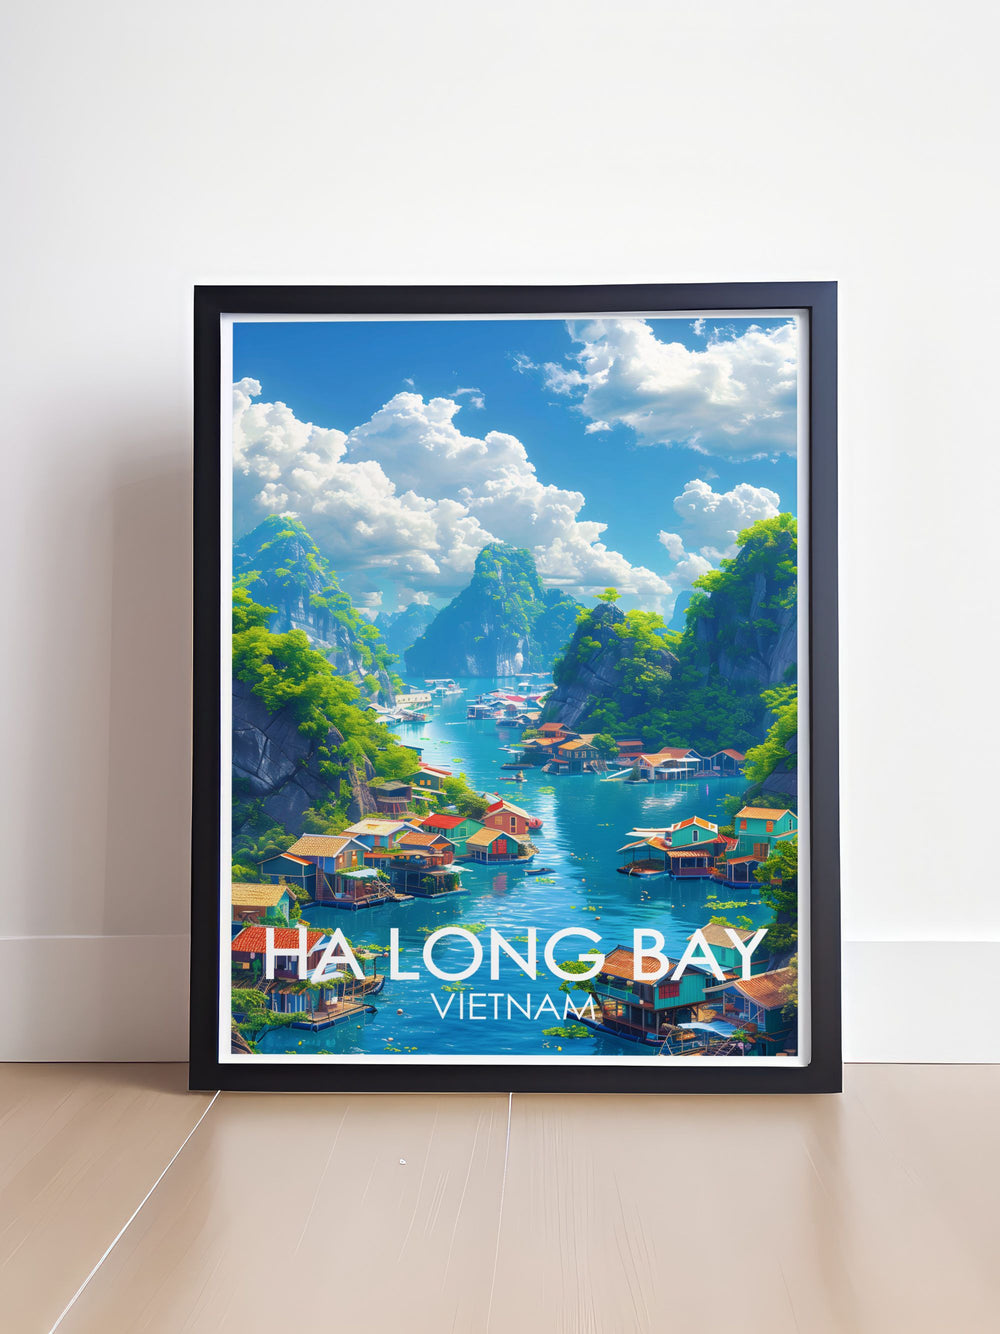 Highlighting the emerald waters and vibrant community life of Ha Long Bay, this travel poster captures the enchanting landscapes and cultural richness of the region, ideal for your home decor.